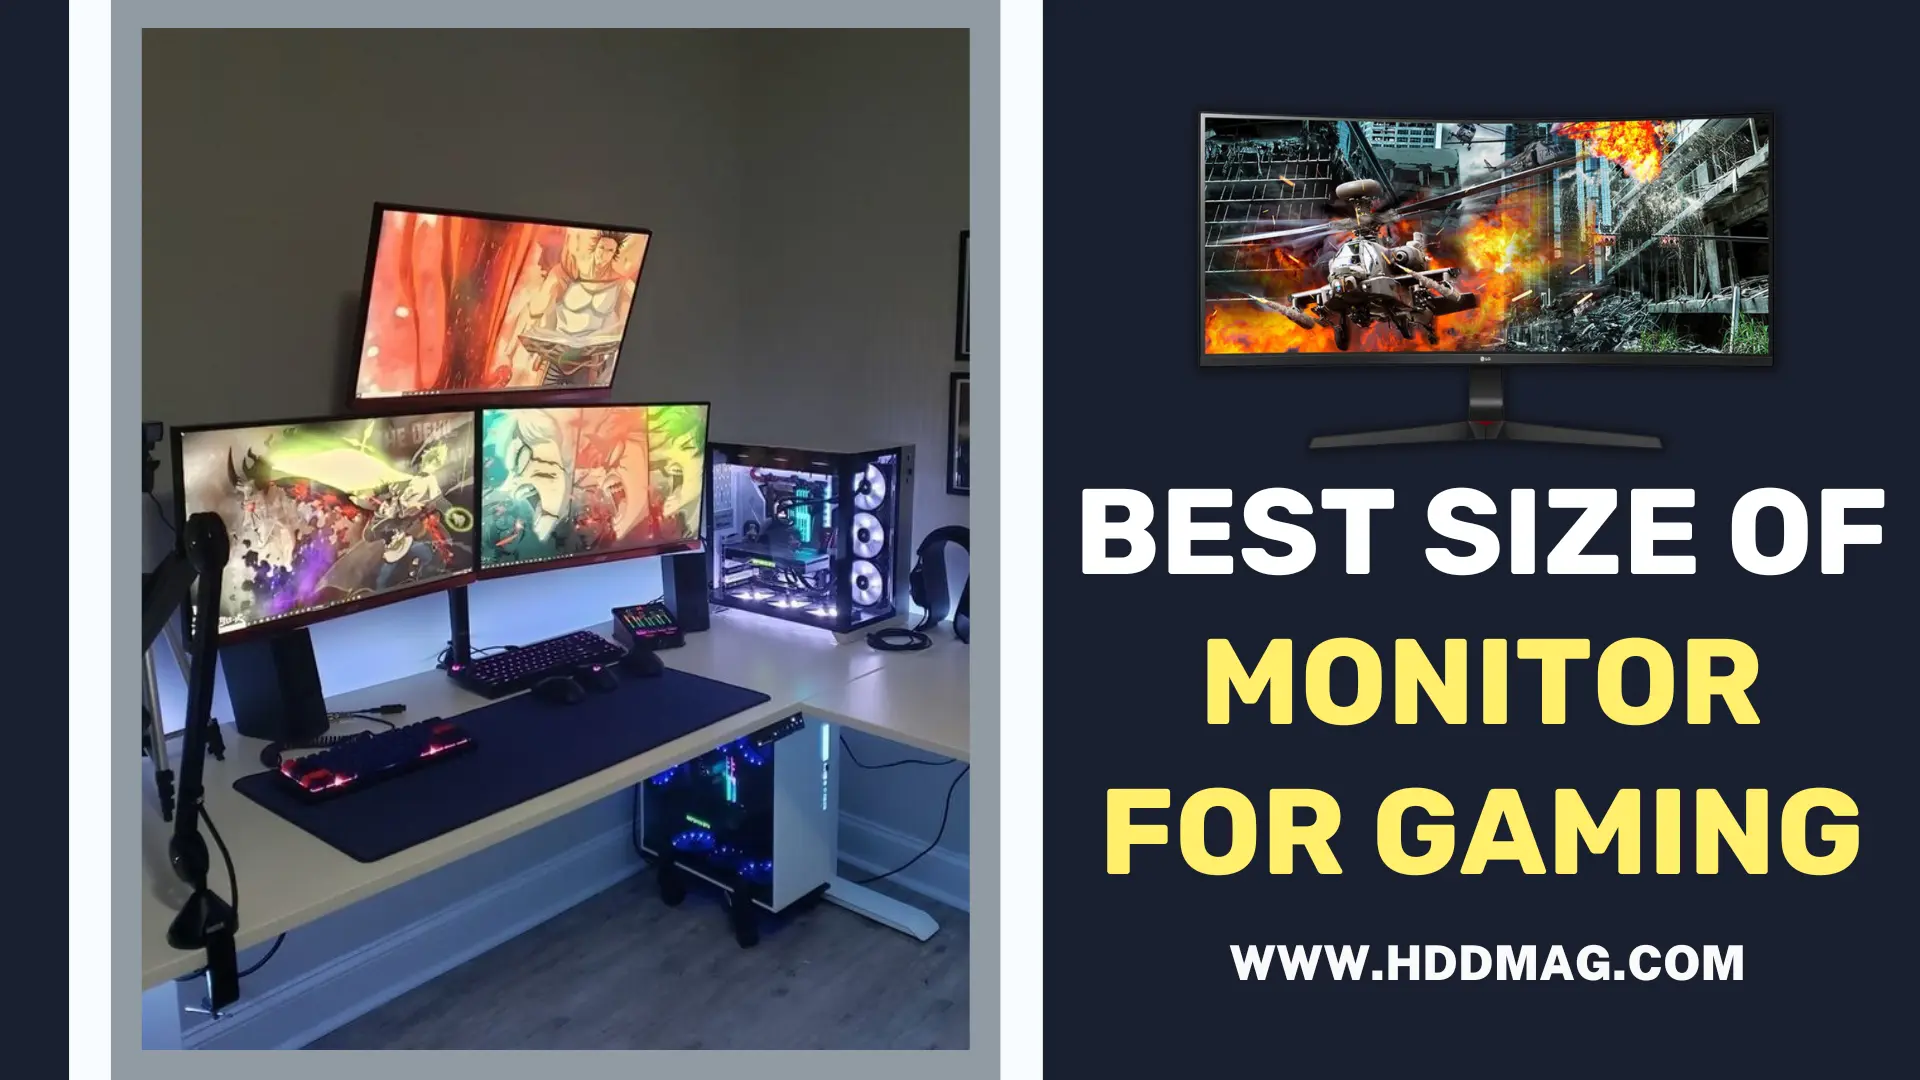 Best Size of Monitor for Gaming